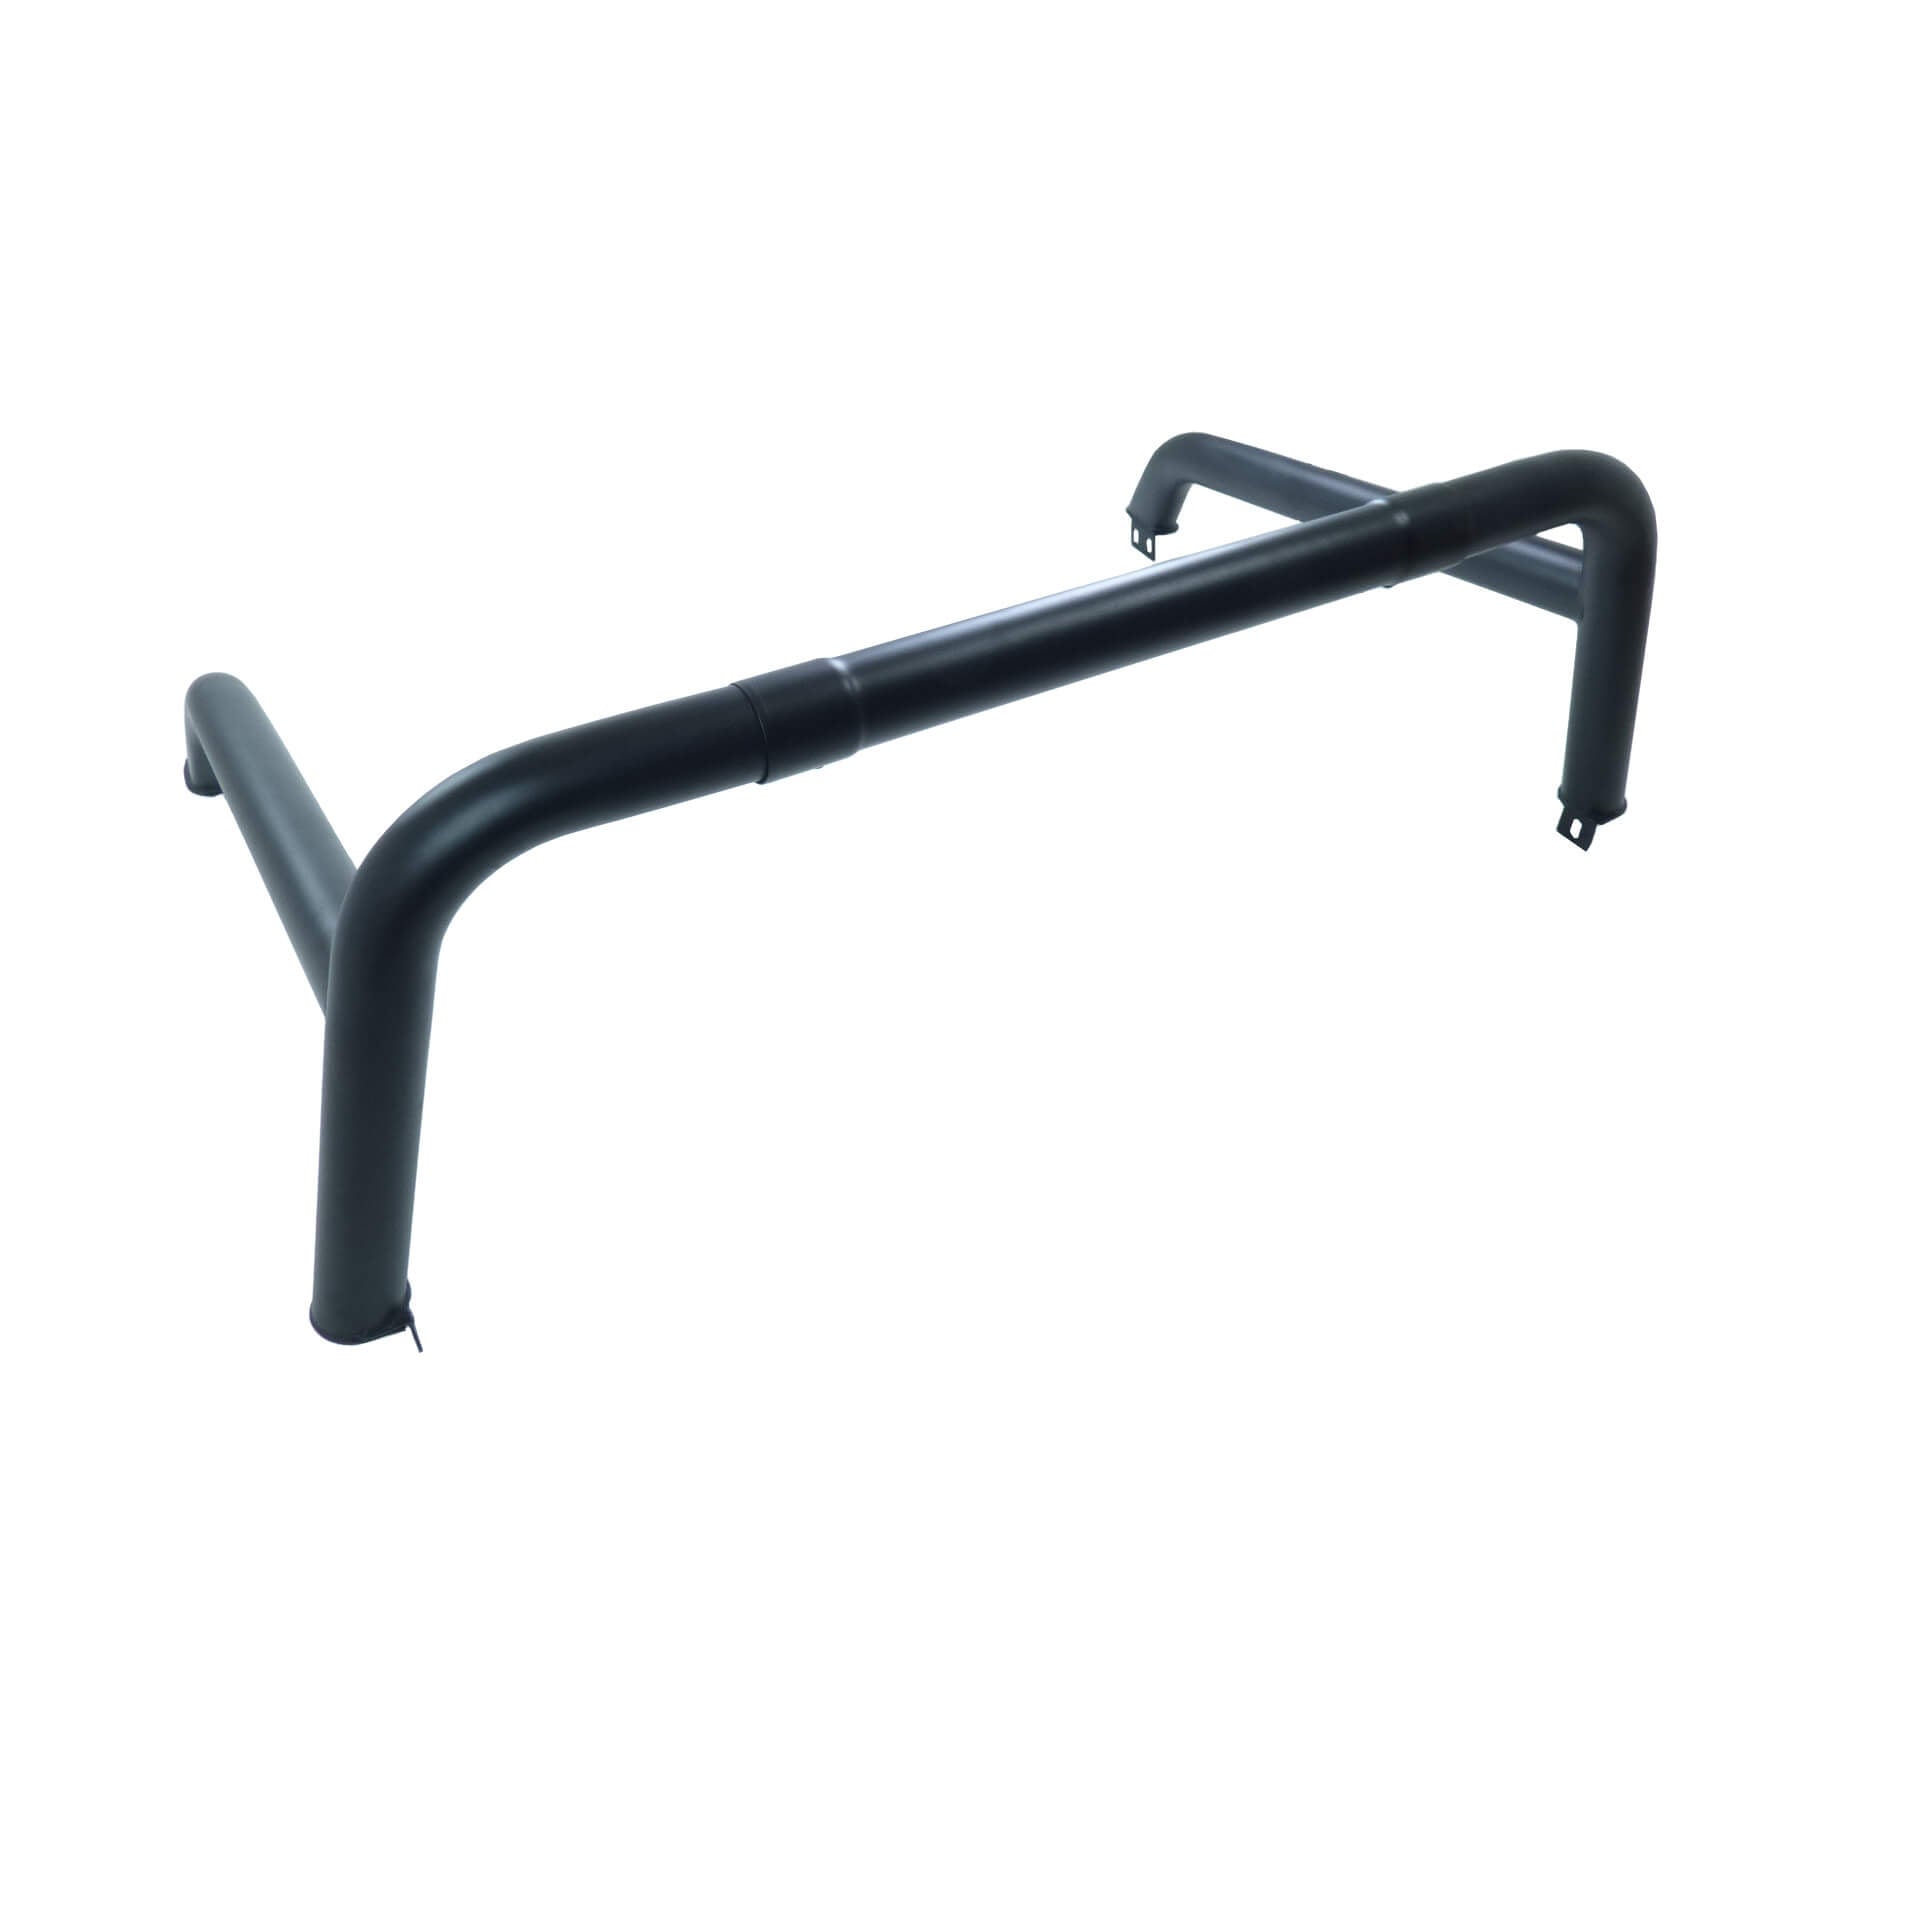 Single Loop Black Roll Sports Bar for Ford Ranger 2012+ MK3 T6 (P375) -  - sold by Direct4x4